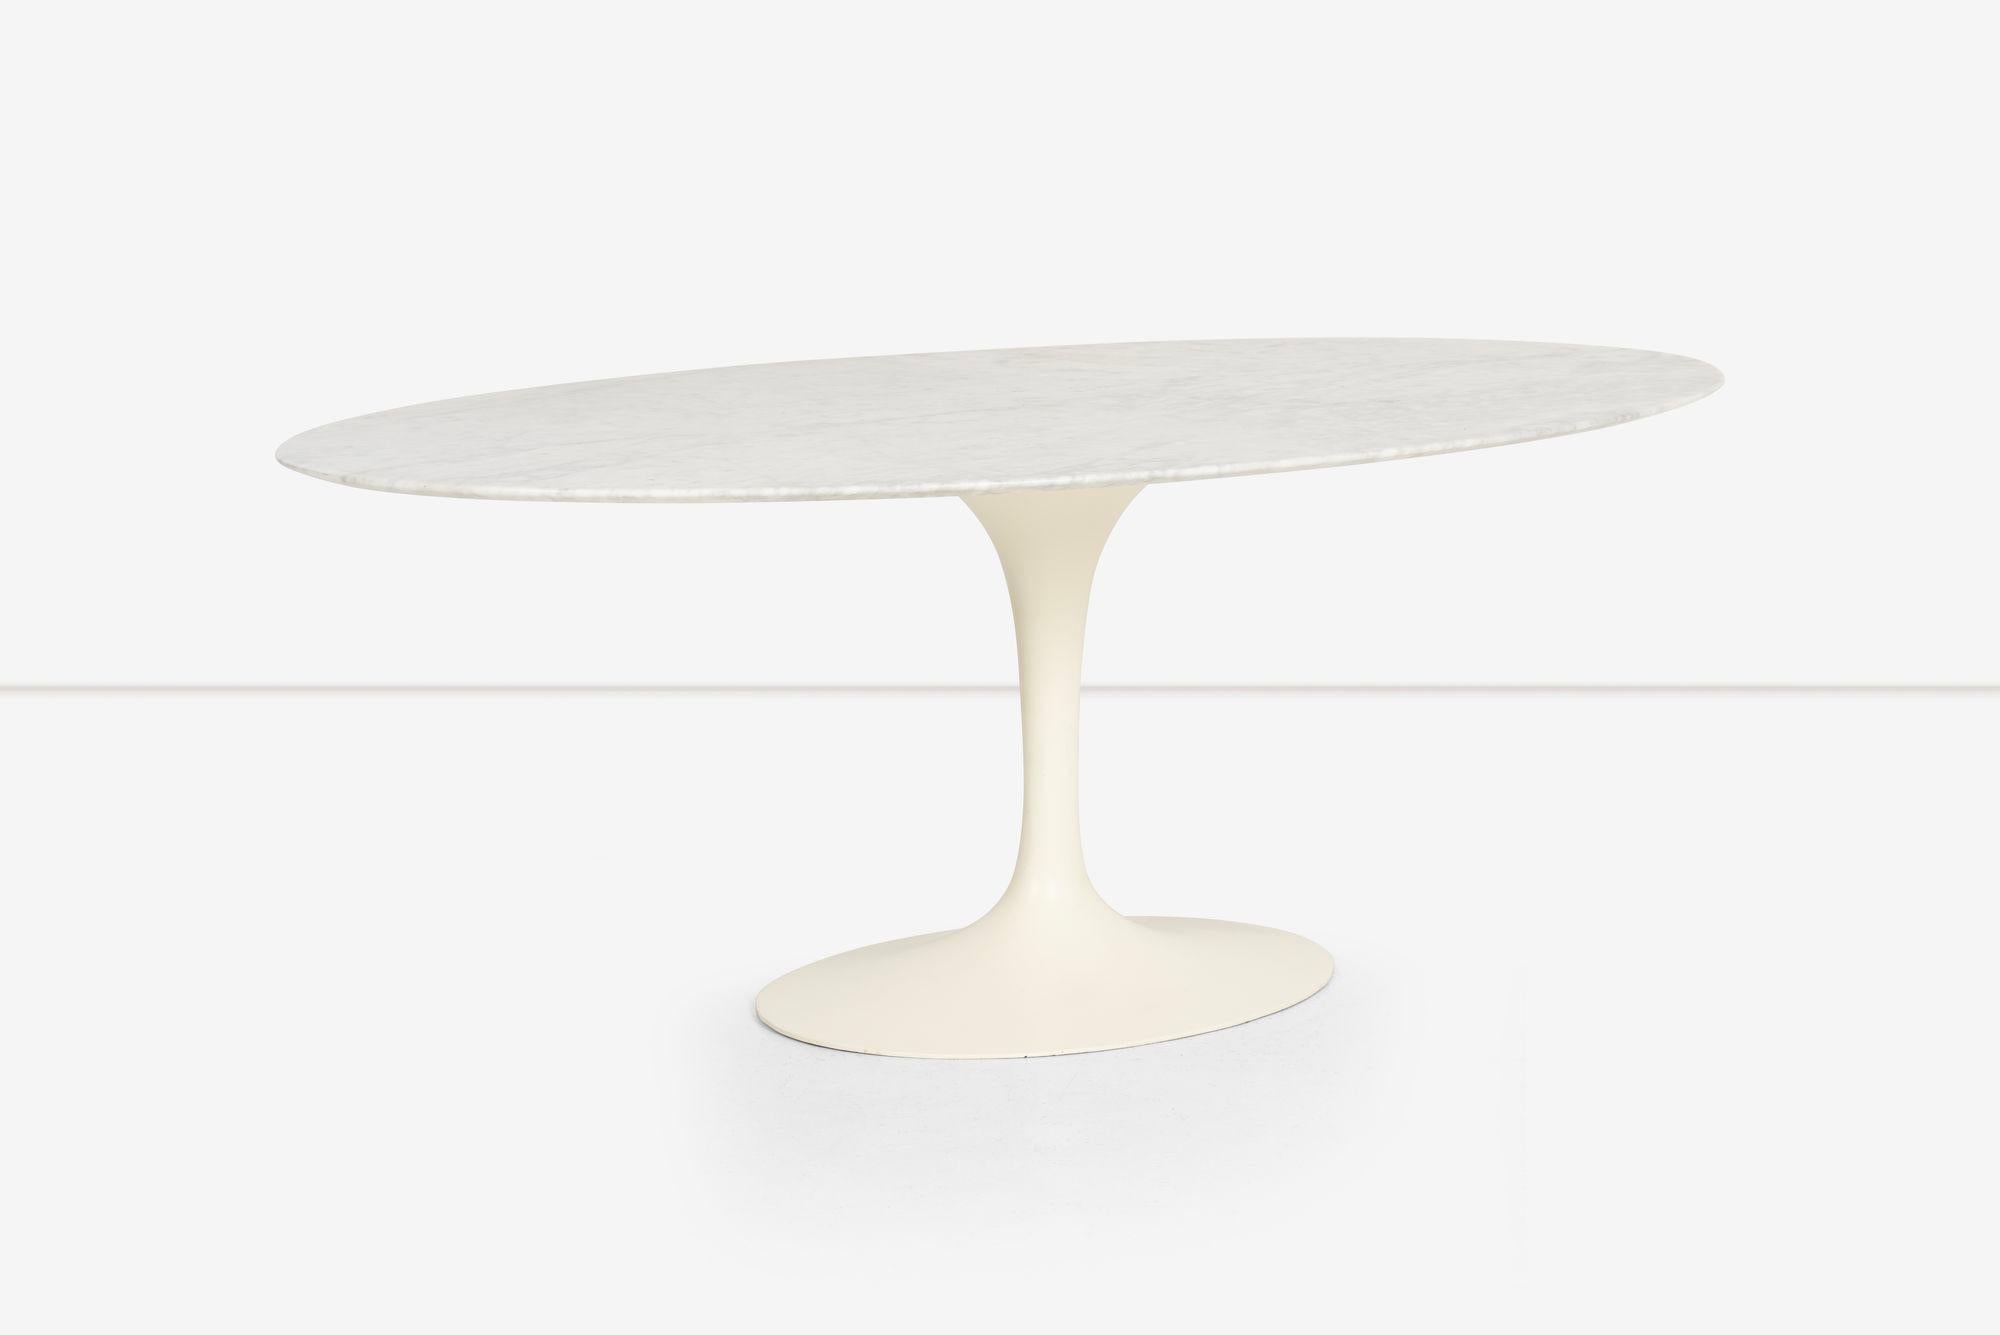 Early Vintage Eero Saarinen Tulip Table, Carrara Marble In Good Condition For Sale In Chicago, IL